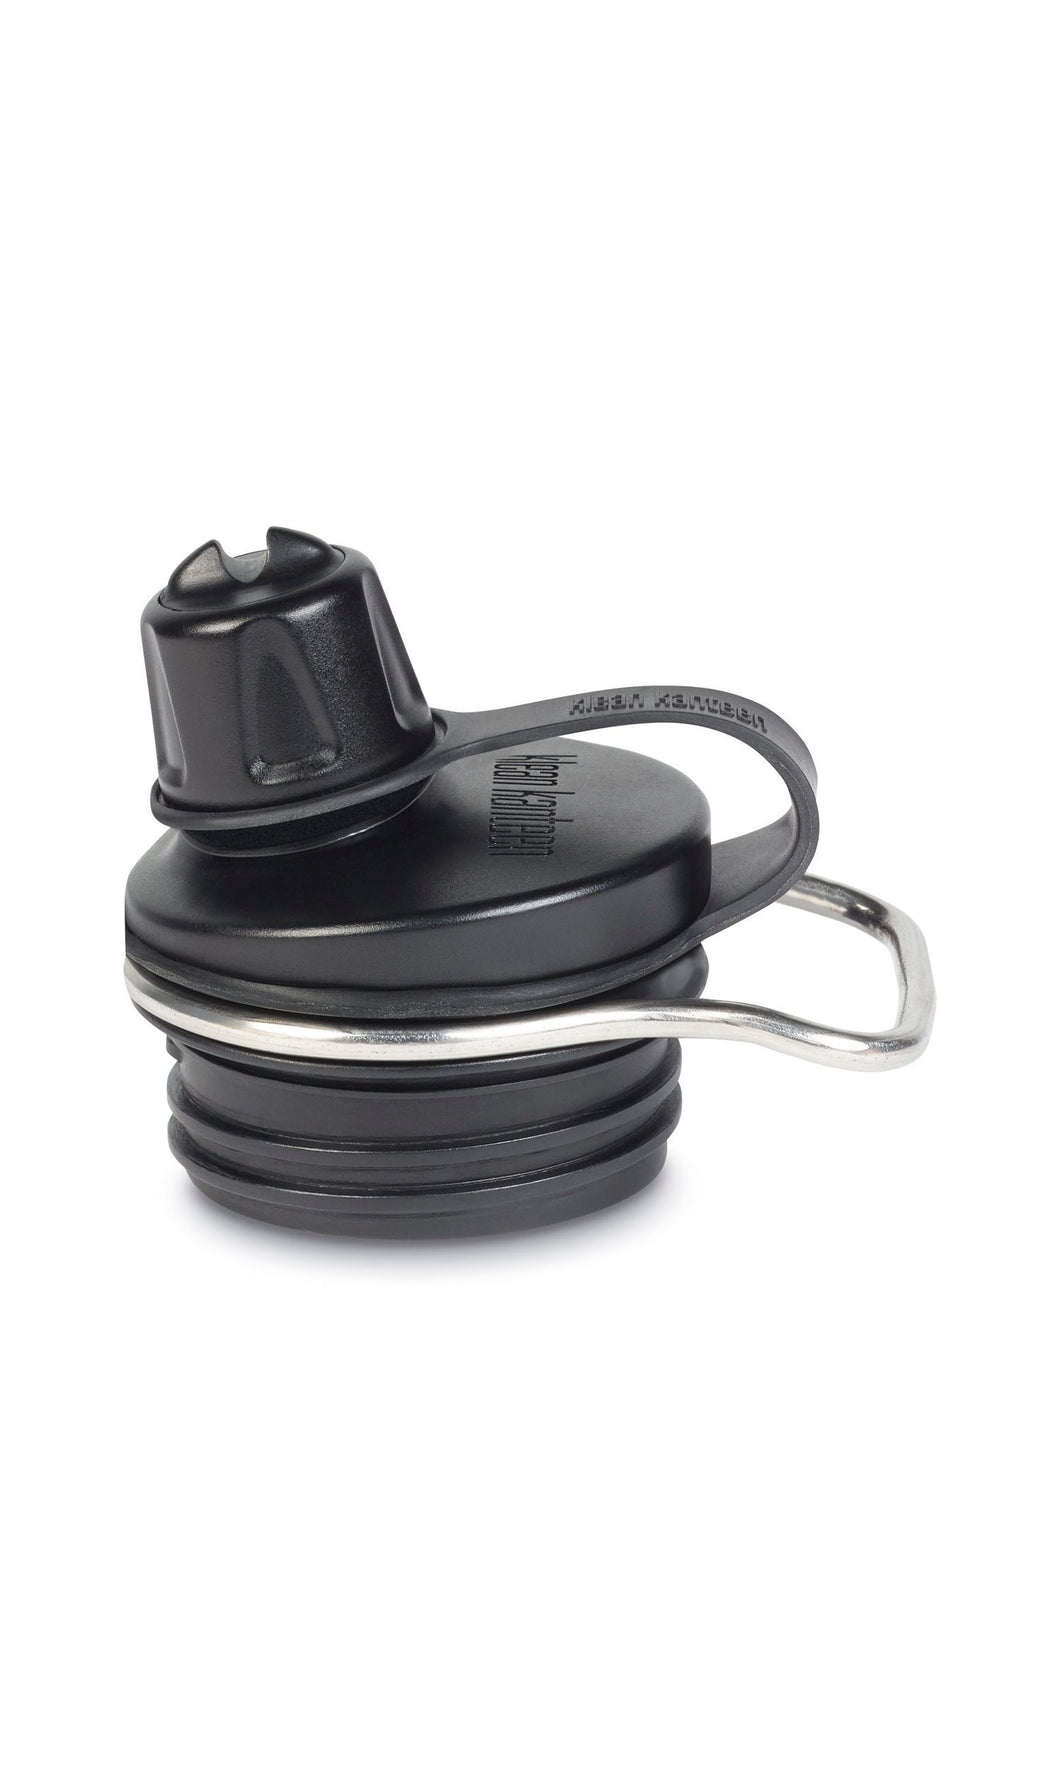 Black plastic cap with a cover that screws on to keep the large mouth piece closed. Stainless steel ring handle sits at the top of the threads of the cap.